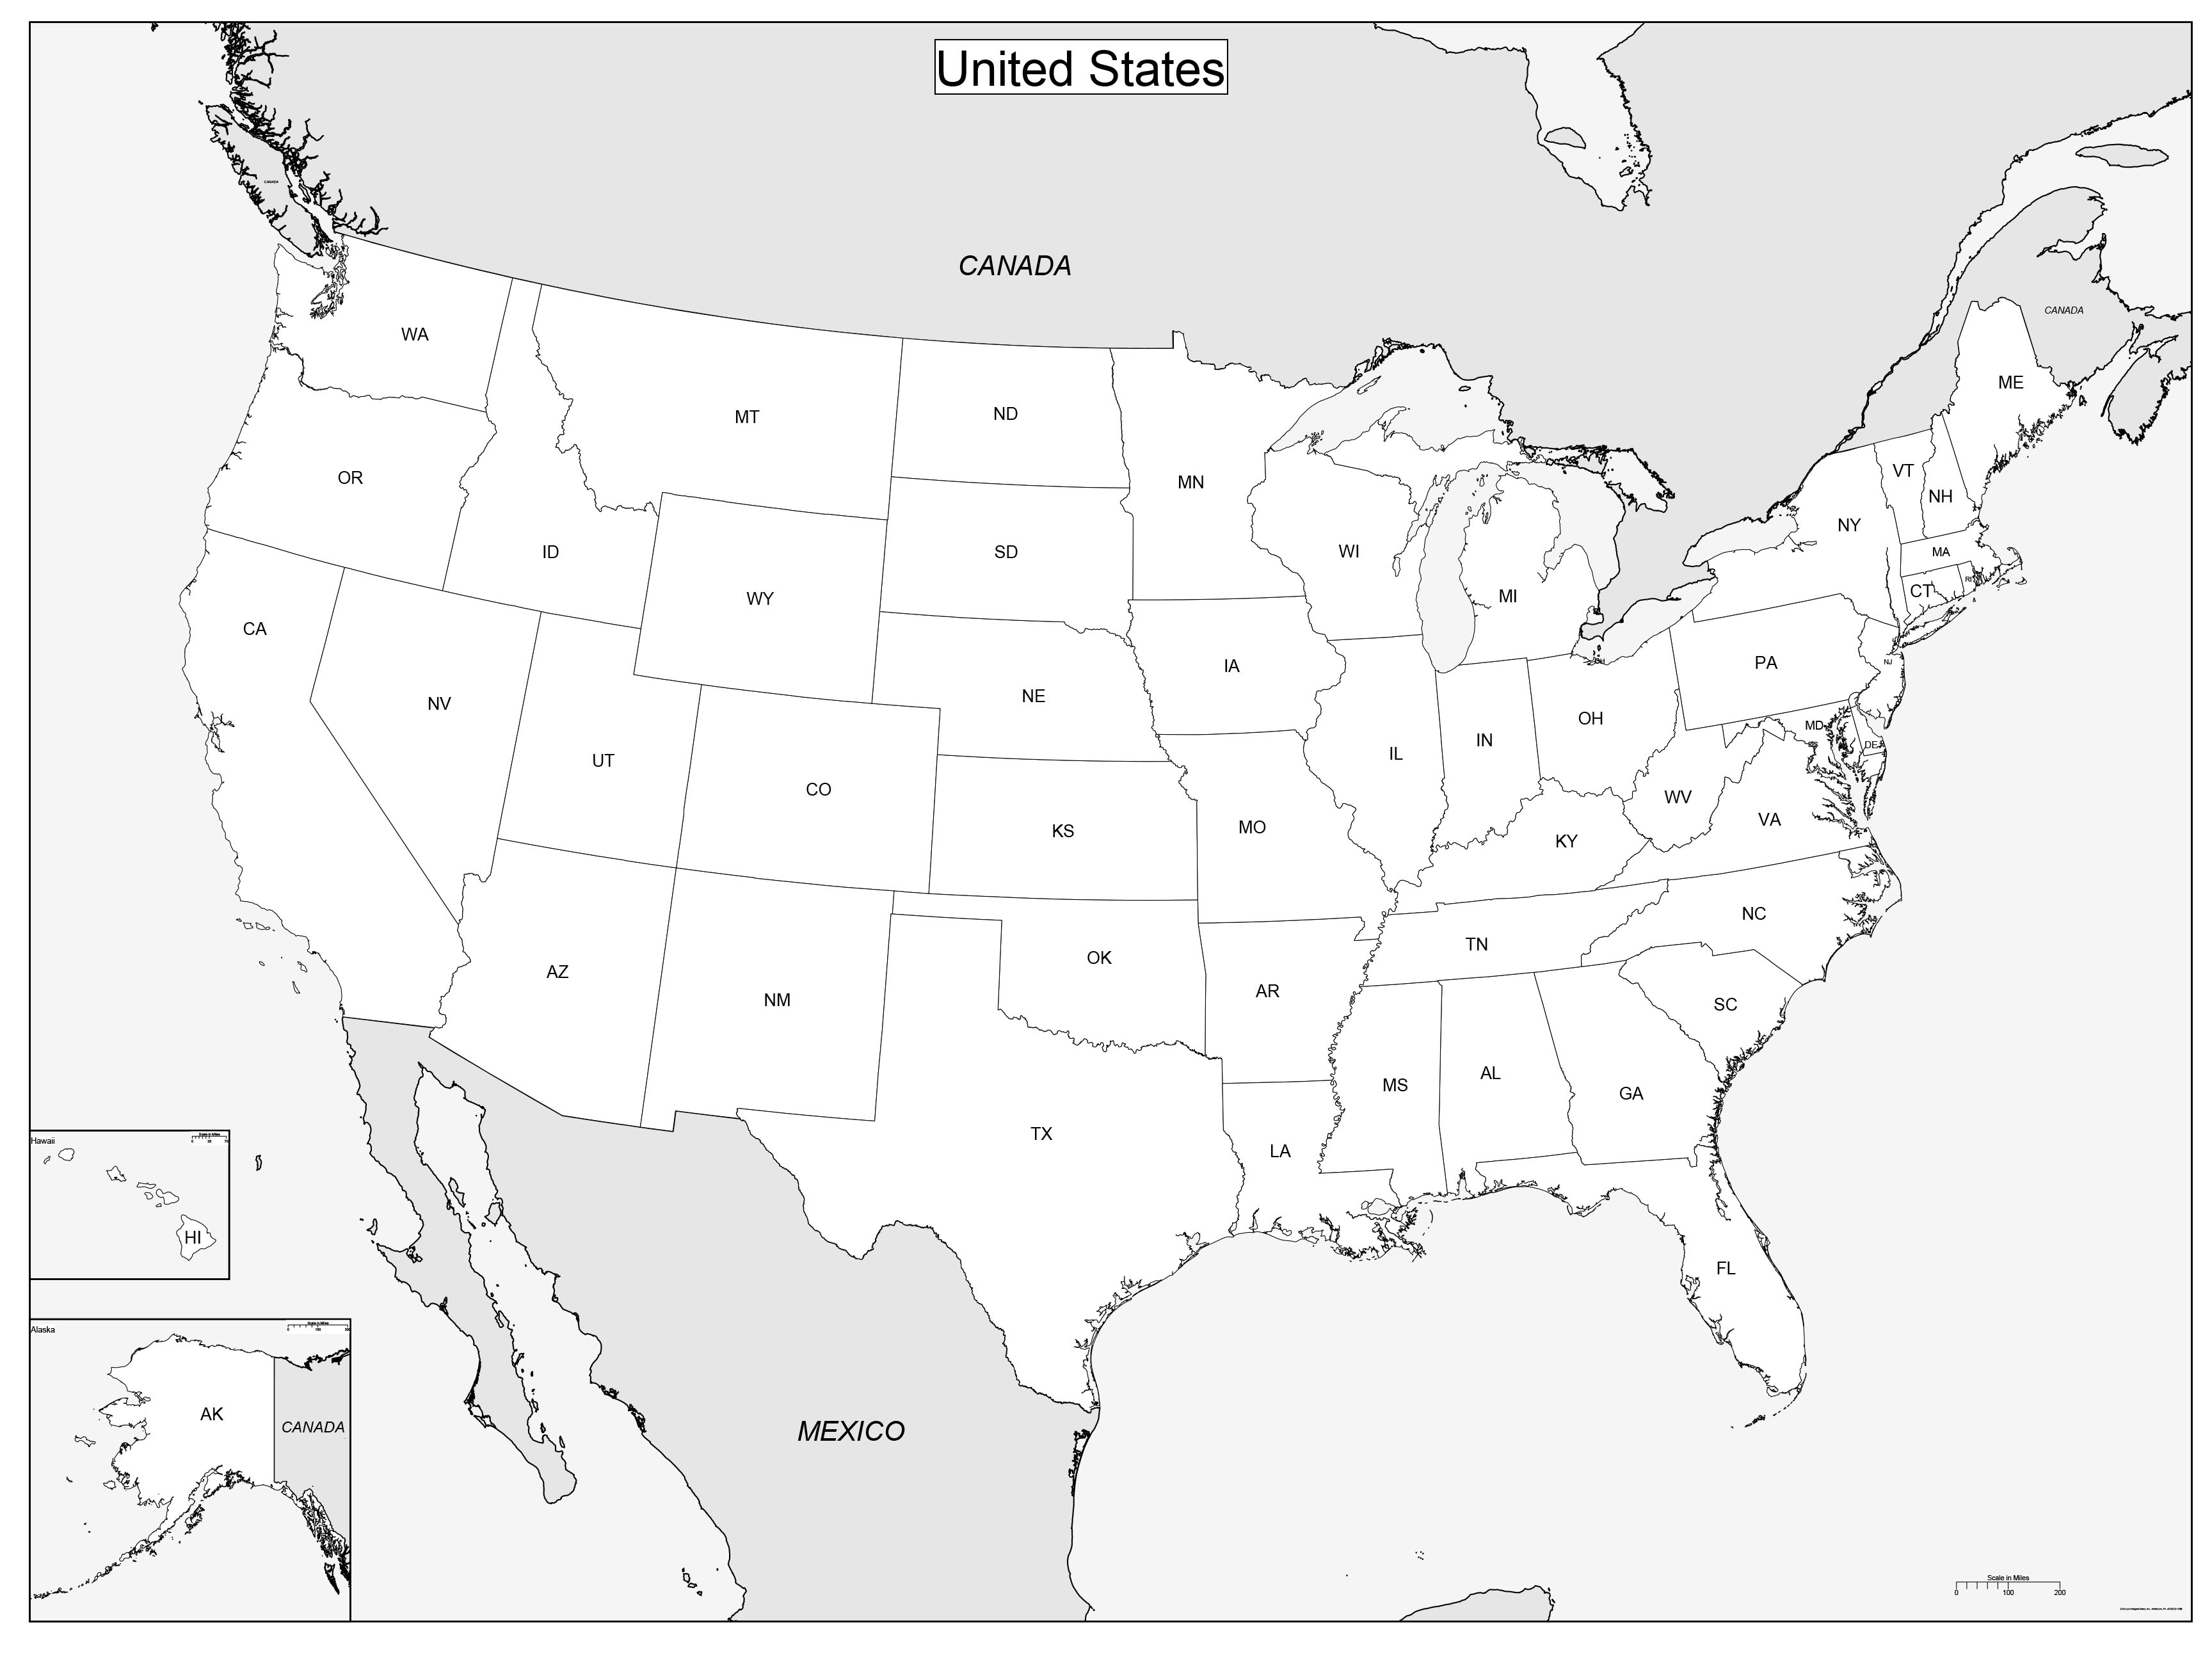 USA State Outline Wall Map by MarketMAPS - MapSales